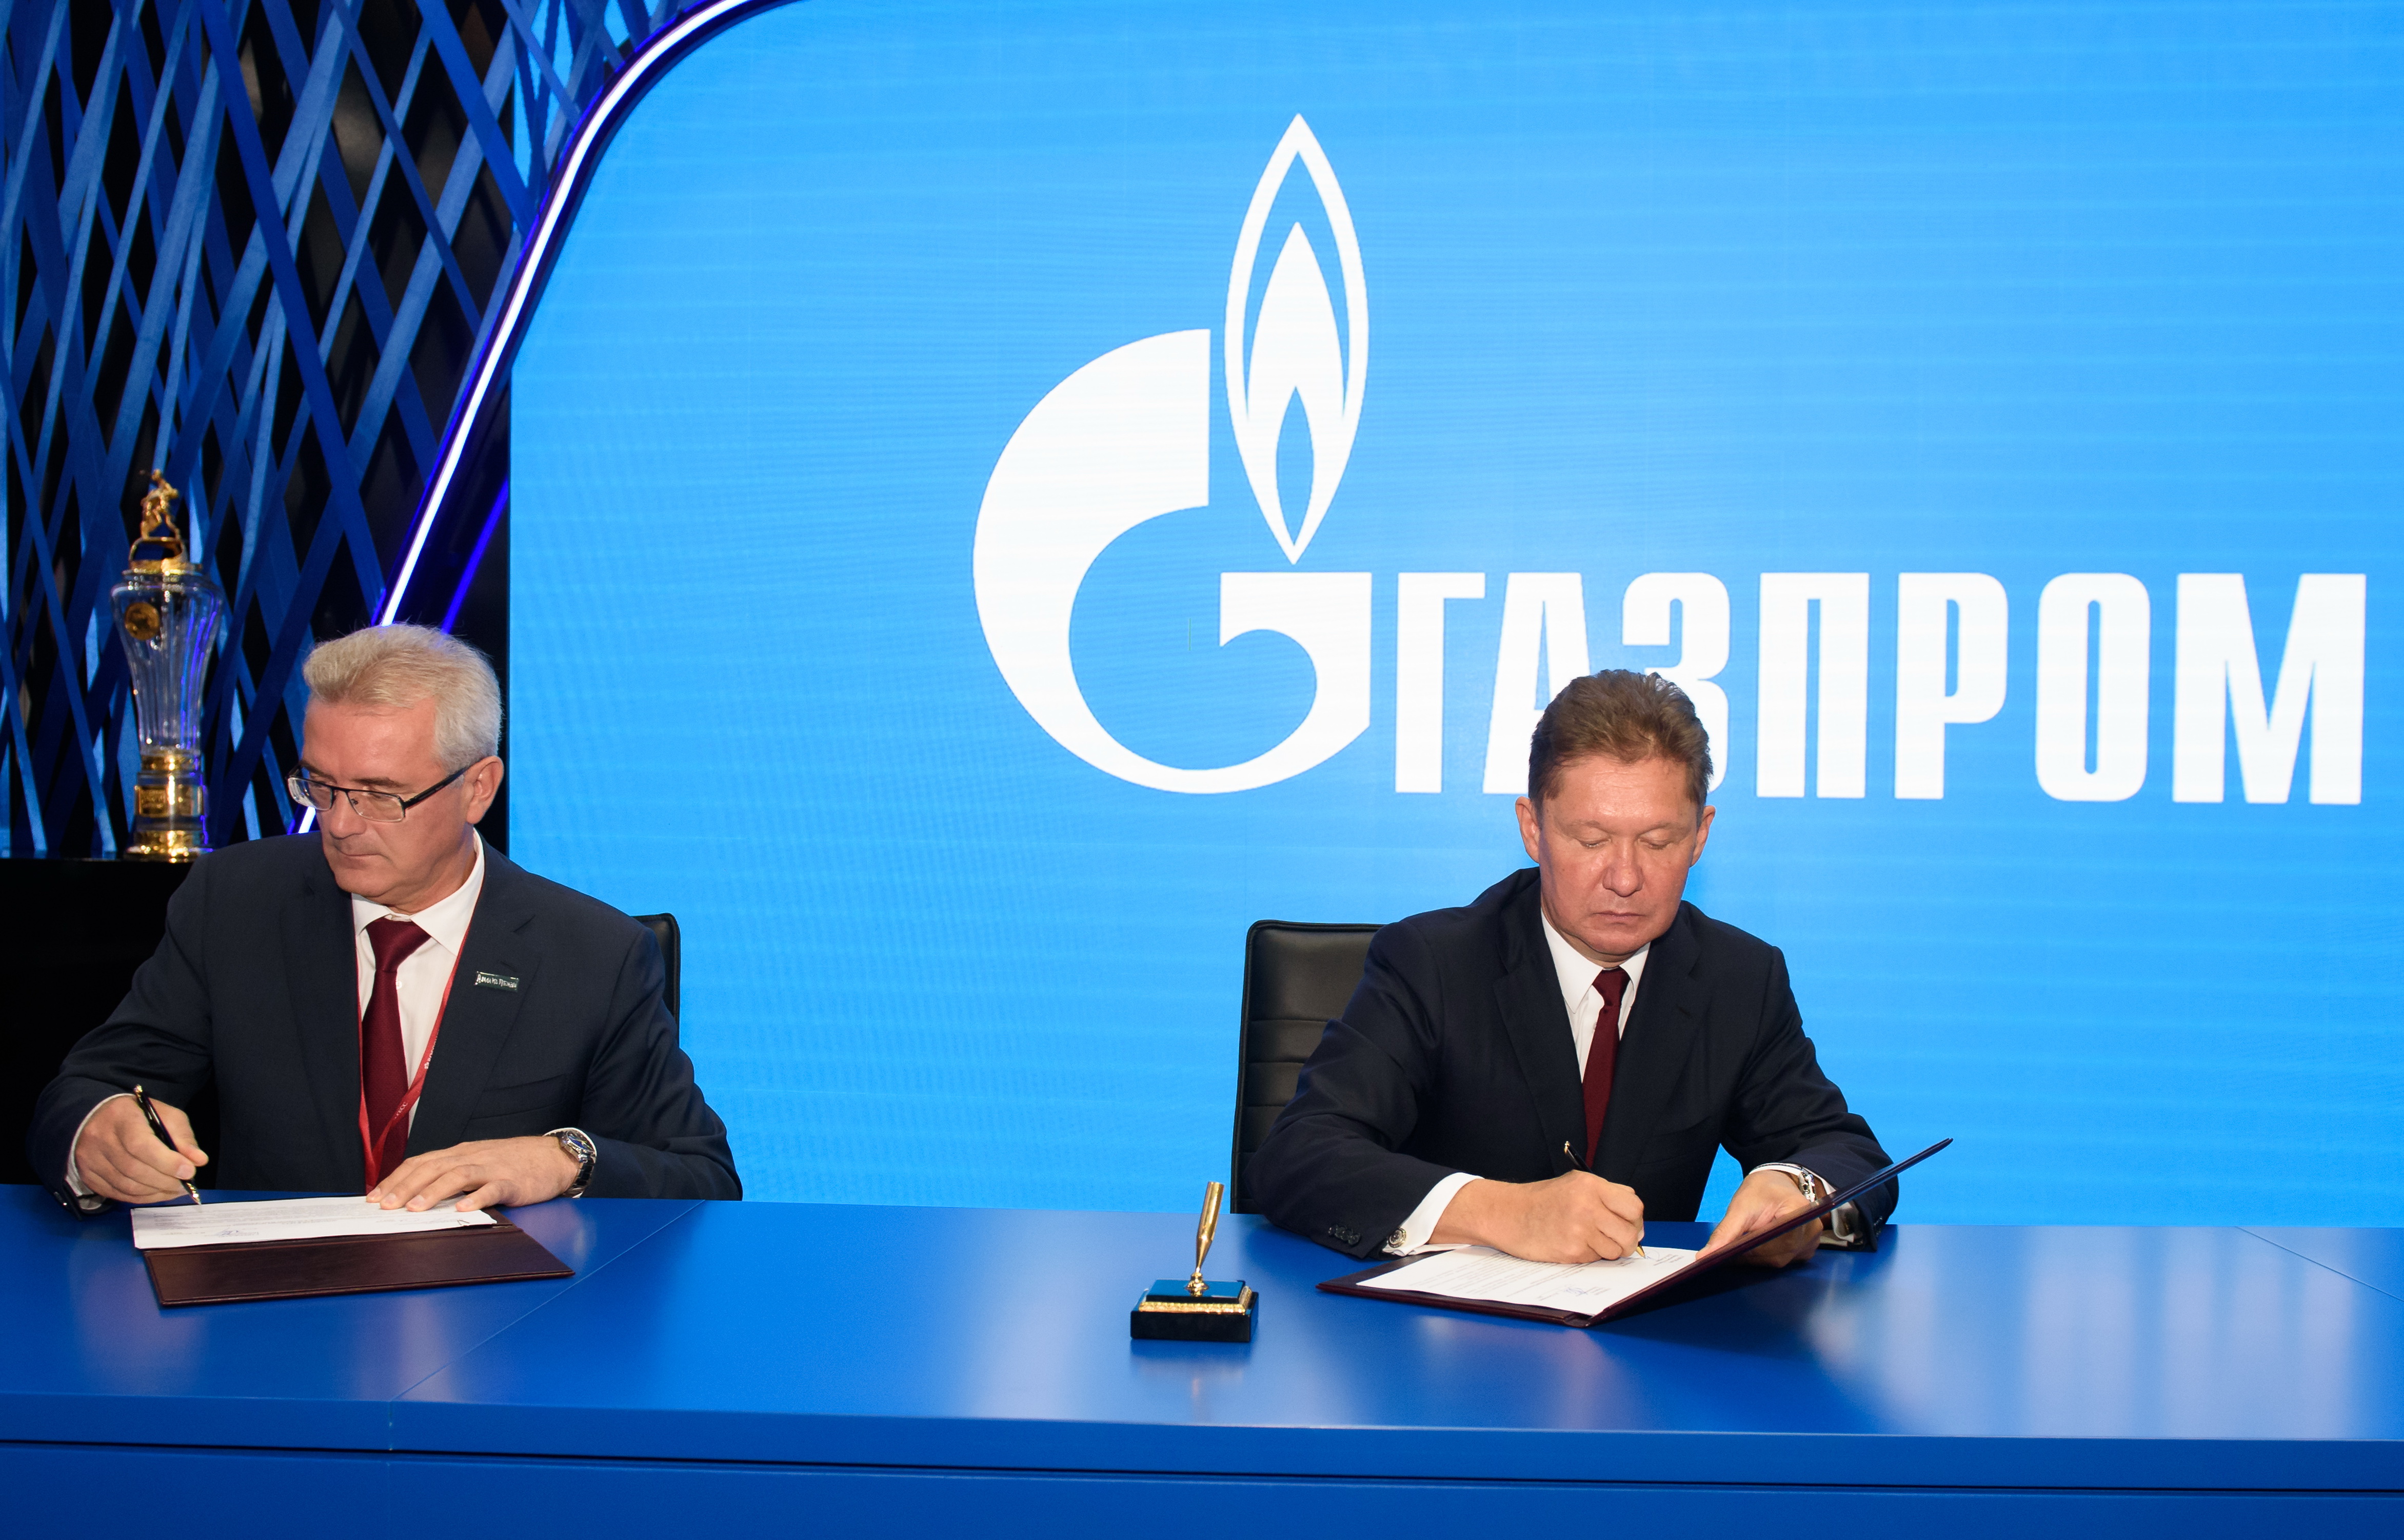 Roadmap signed to expand use by Gazprom of products manufactured by Penza Region’s companies